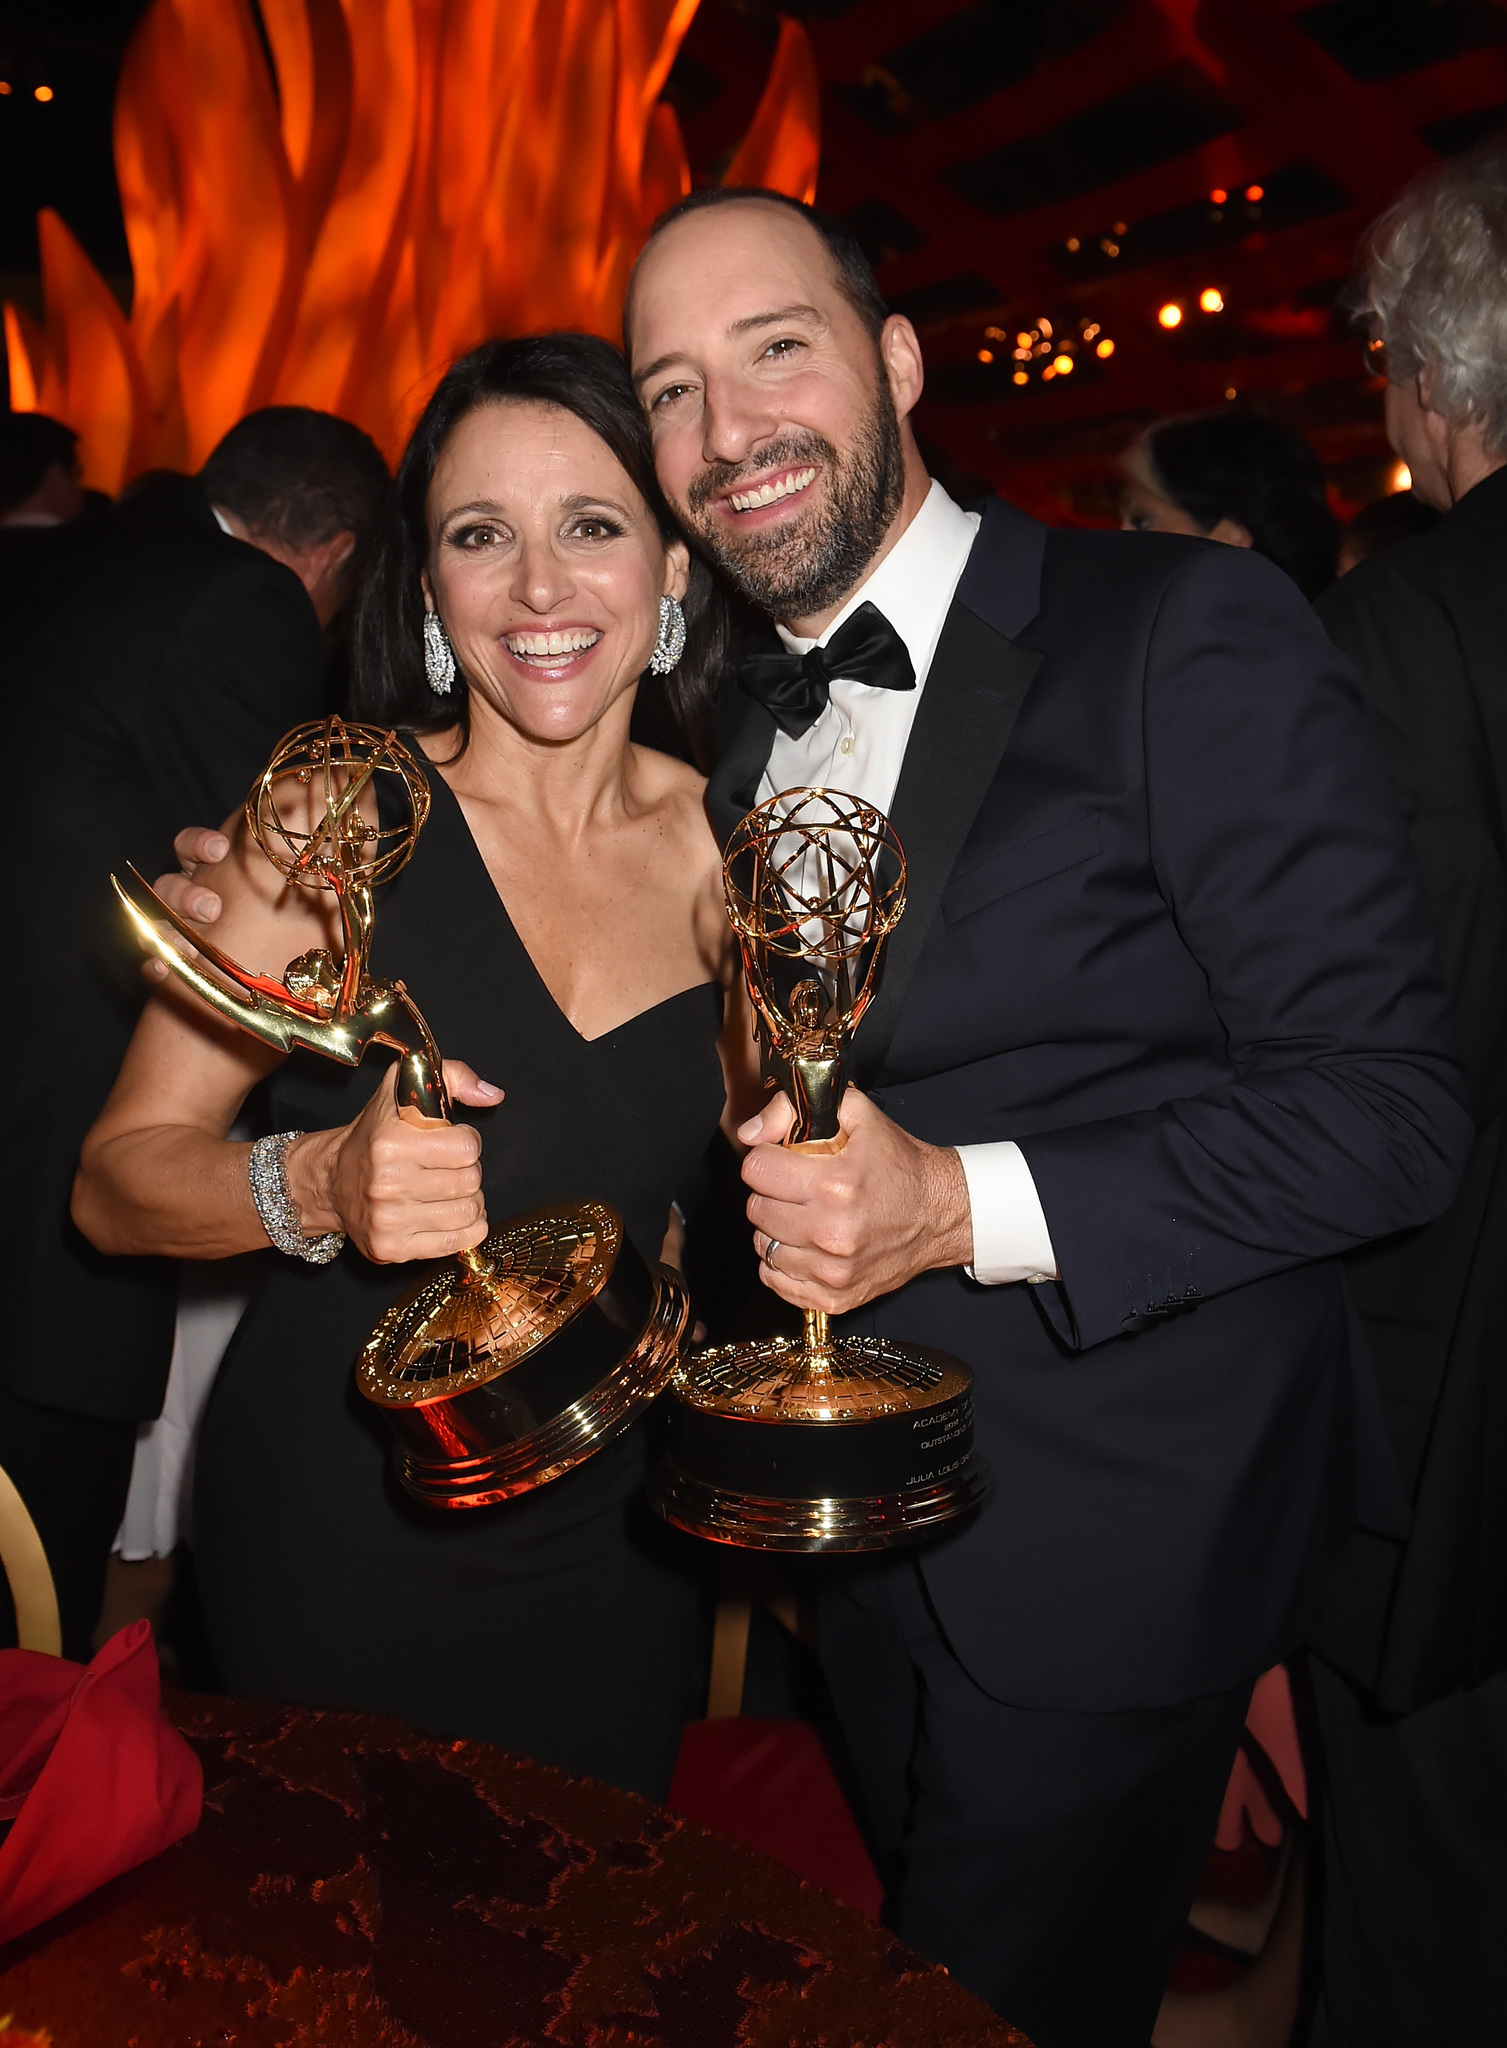 Julia Louis-Dreyfus and Tony Hale at event of The 67th Primetime Emmy Awards (2015)